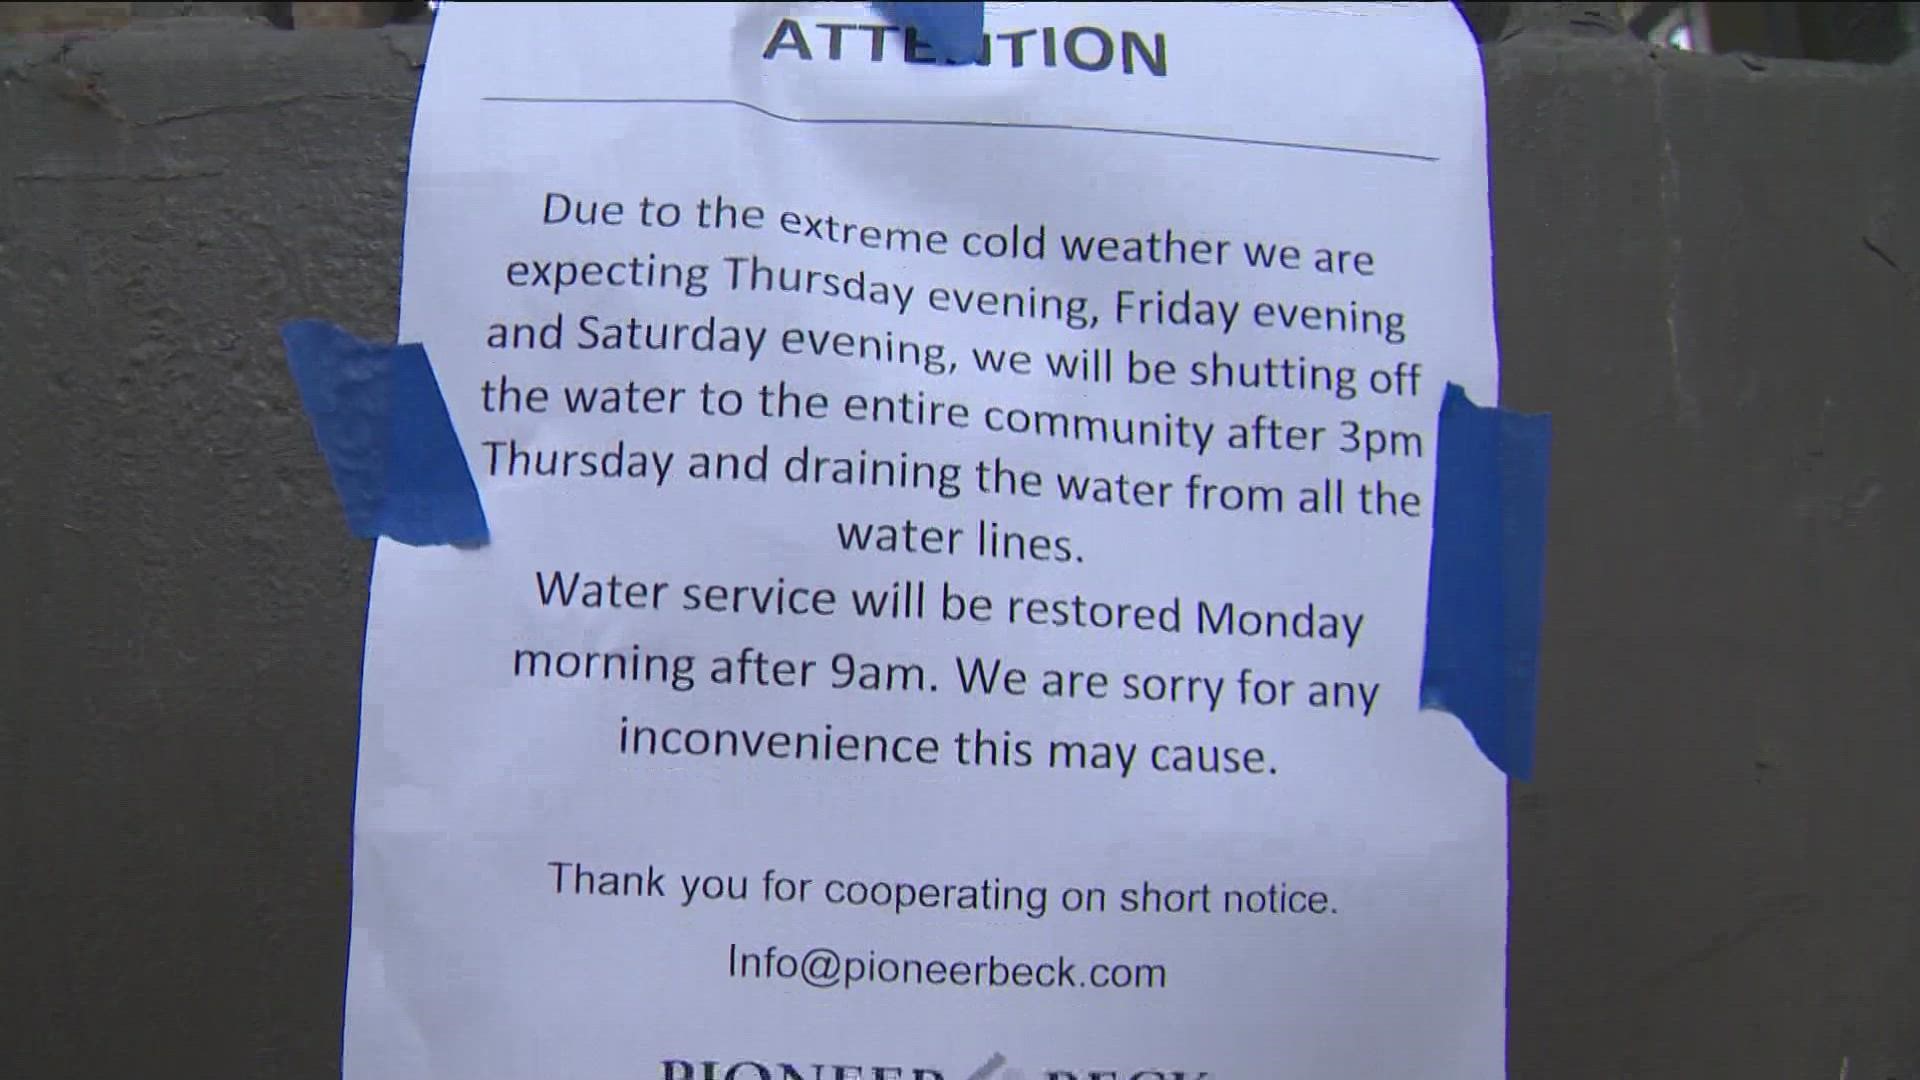 Water at one Austin apartment complex will be shut off during the cold. But are management groups allowed to do that?